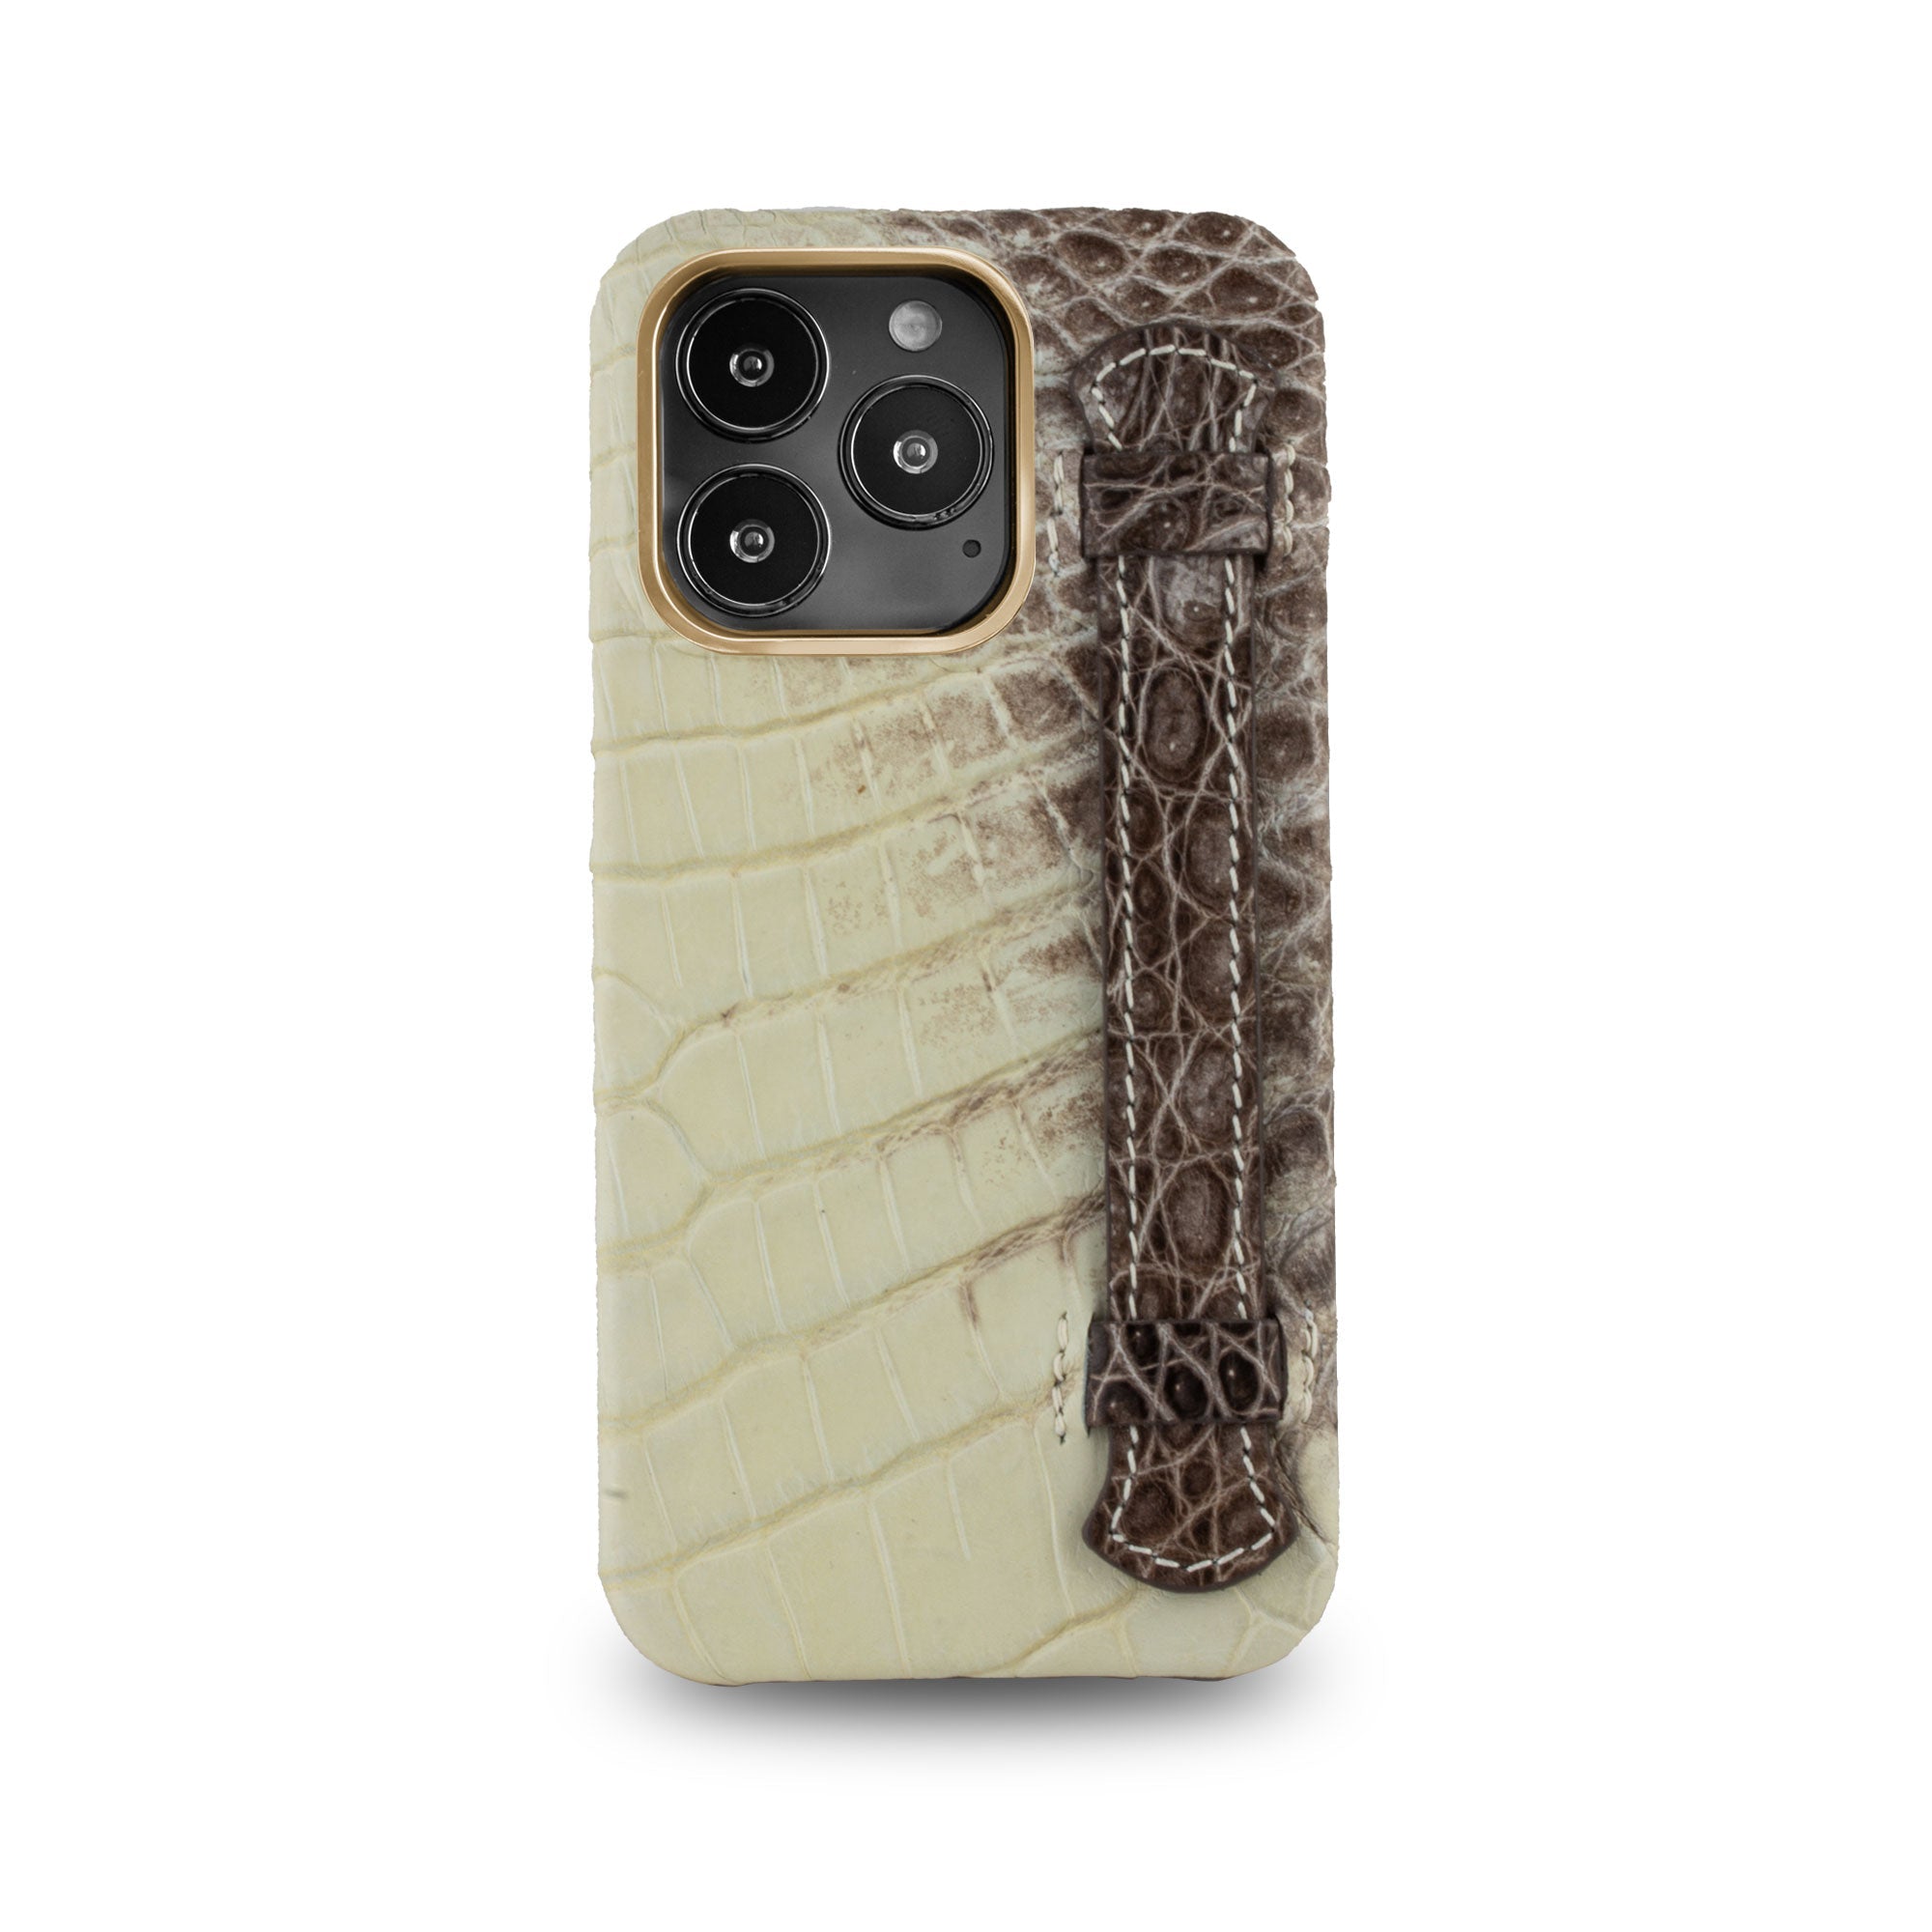 Leather iPhone HIMALAYA Strap case / cover - iPhone 15, 14 & 13